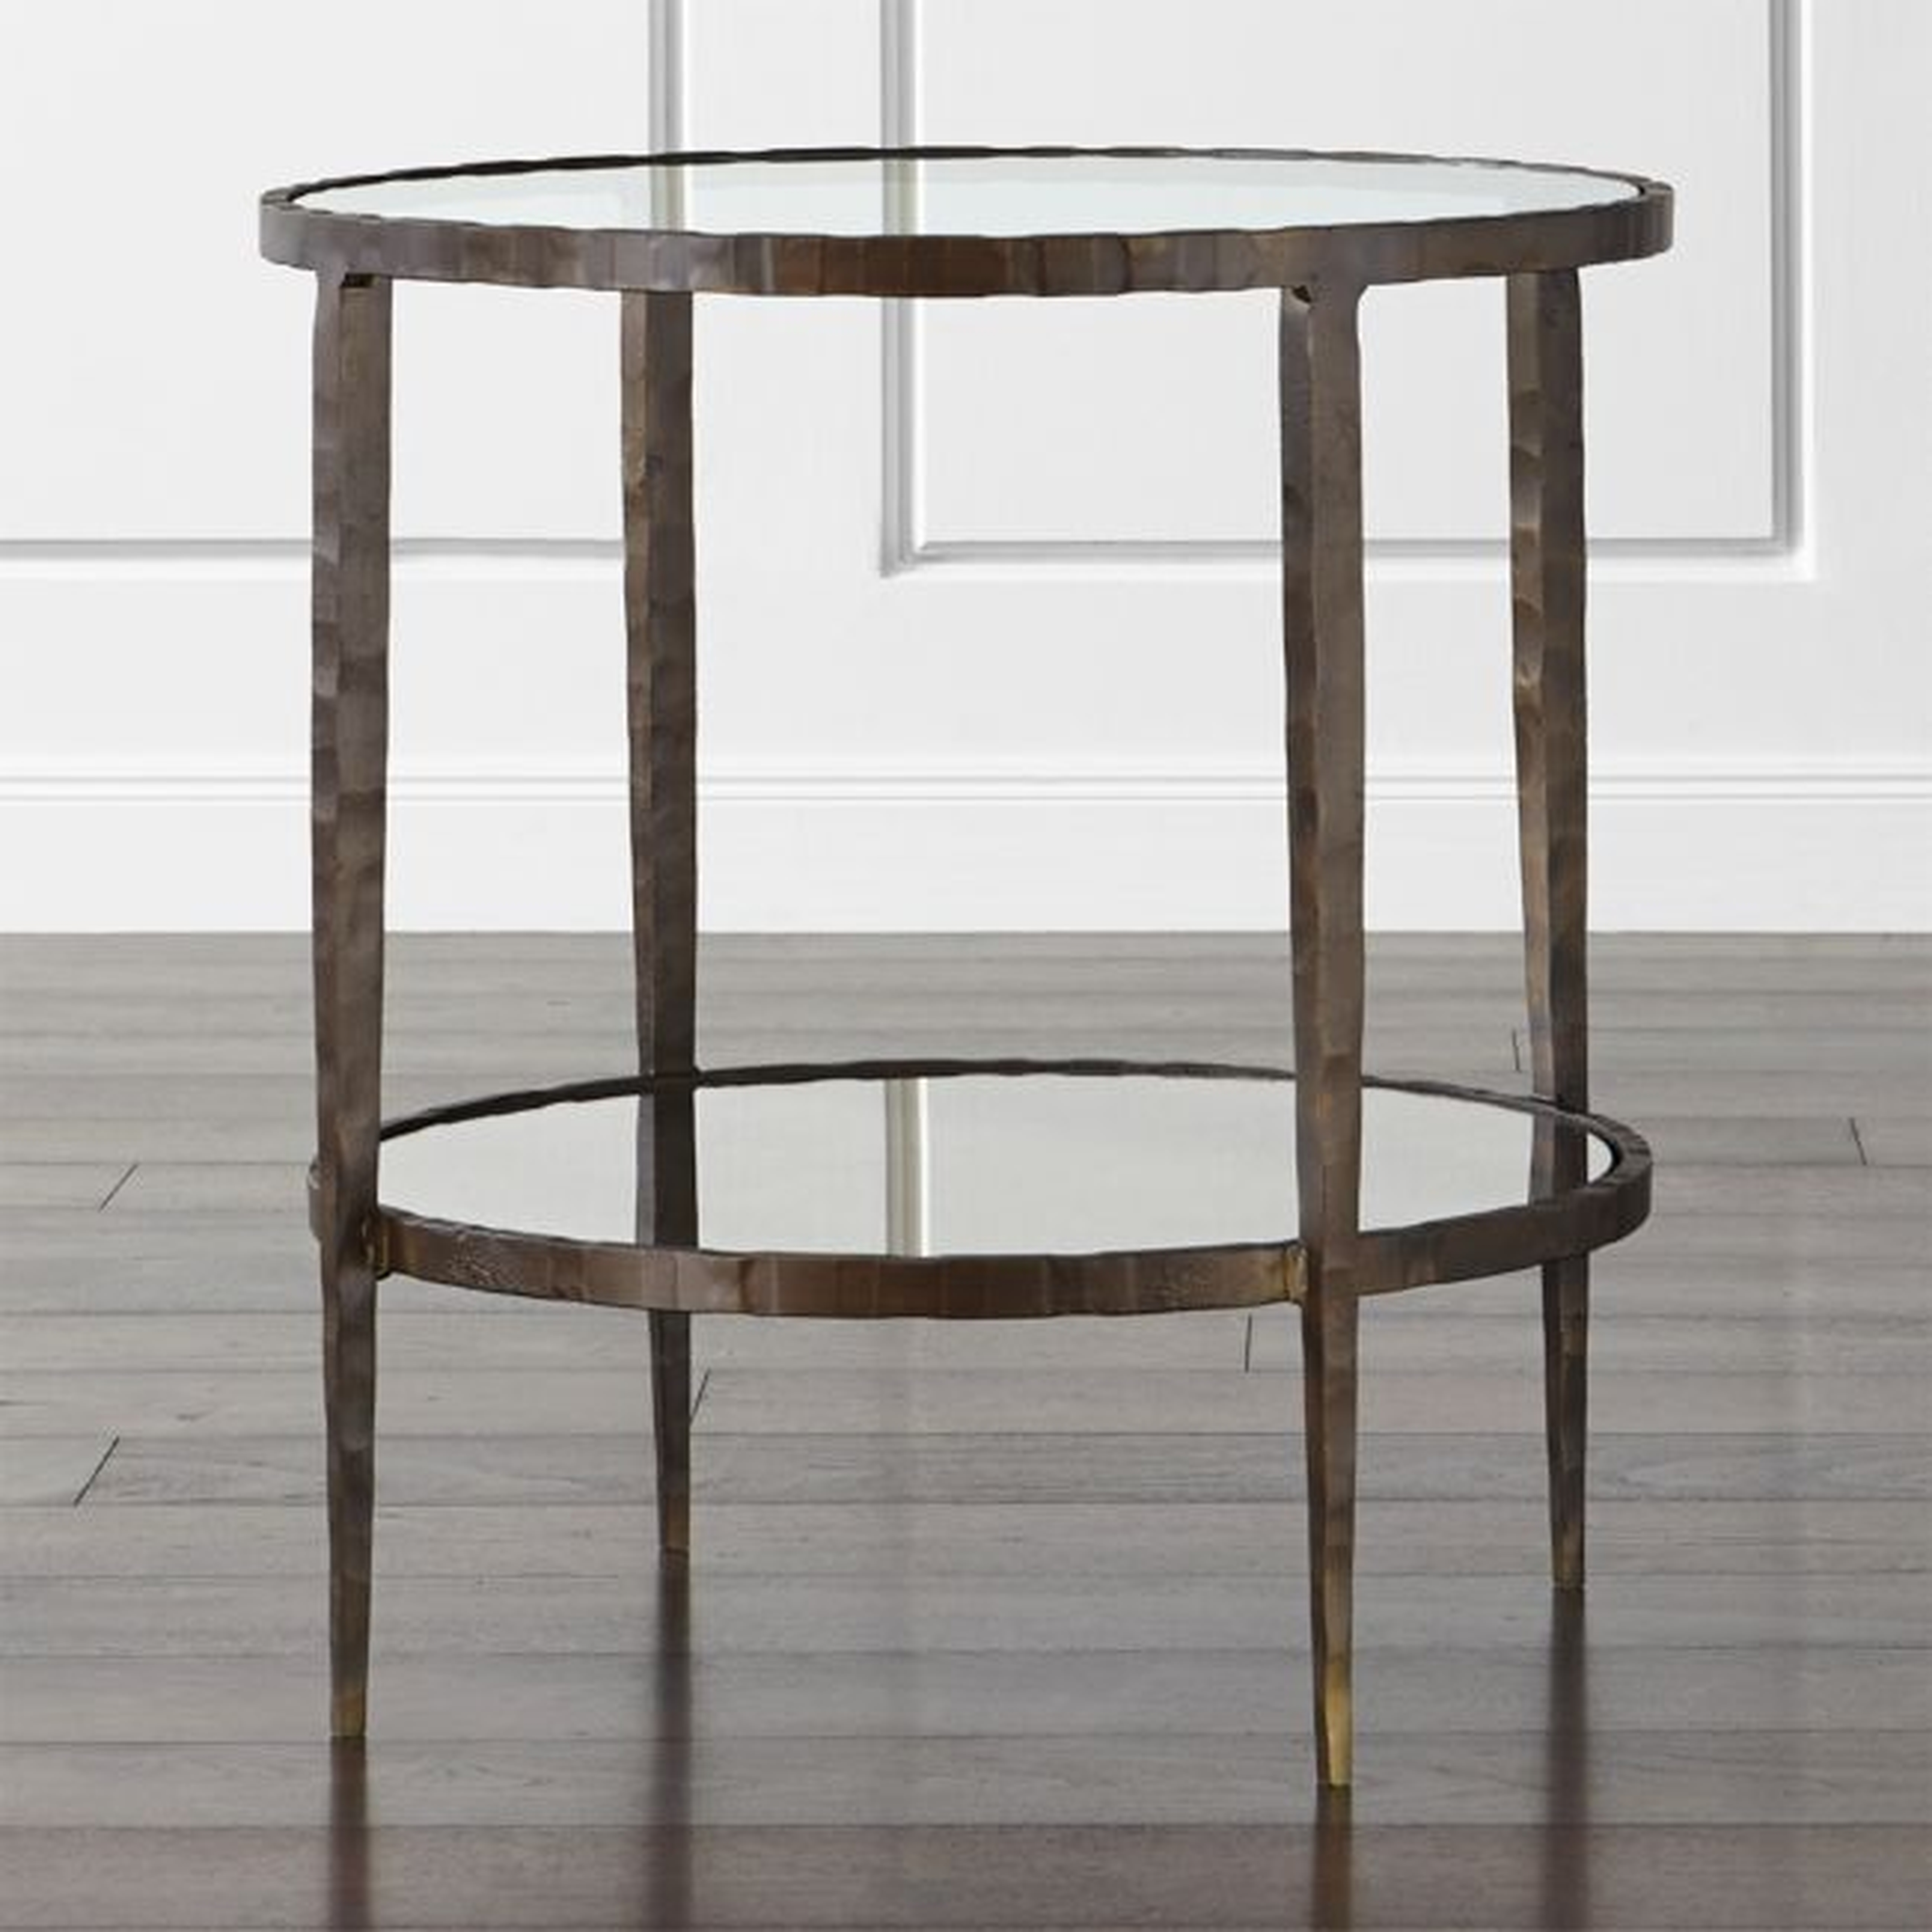 Clairemont Round Side Table with Shelf - Crate and Barrel